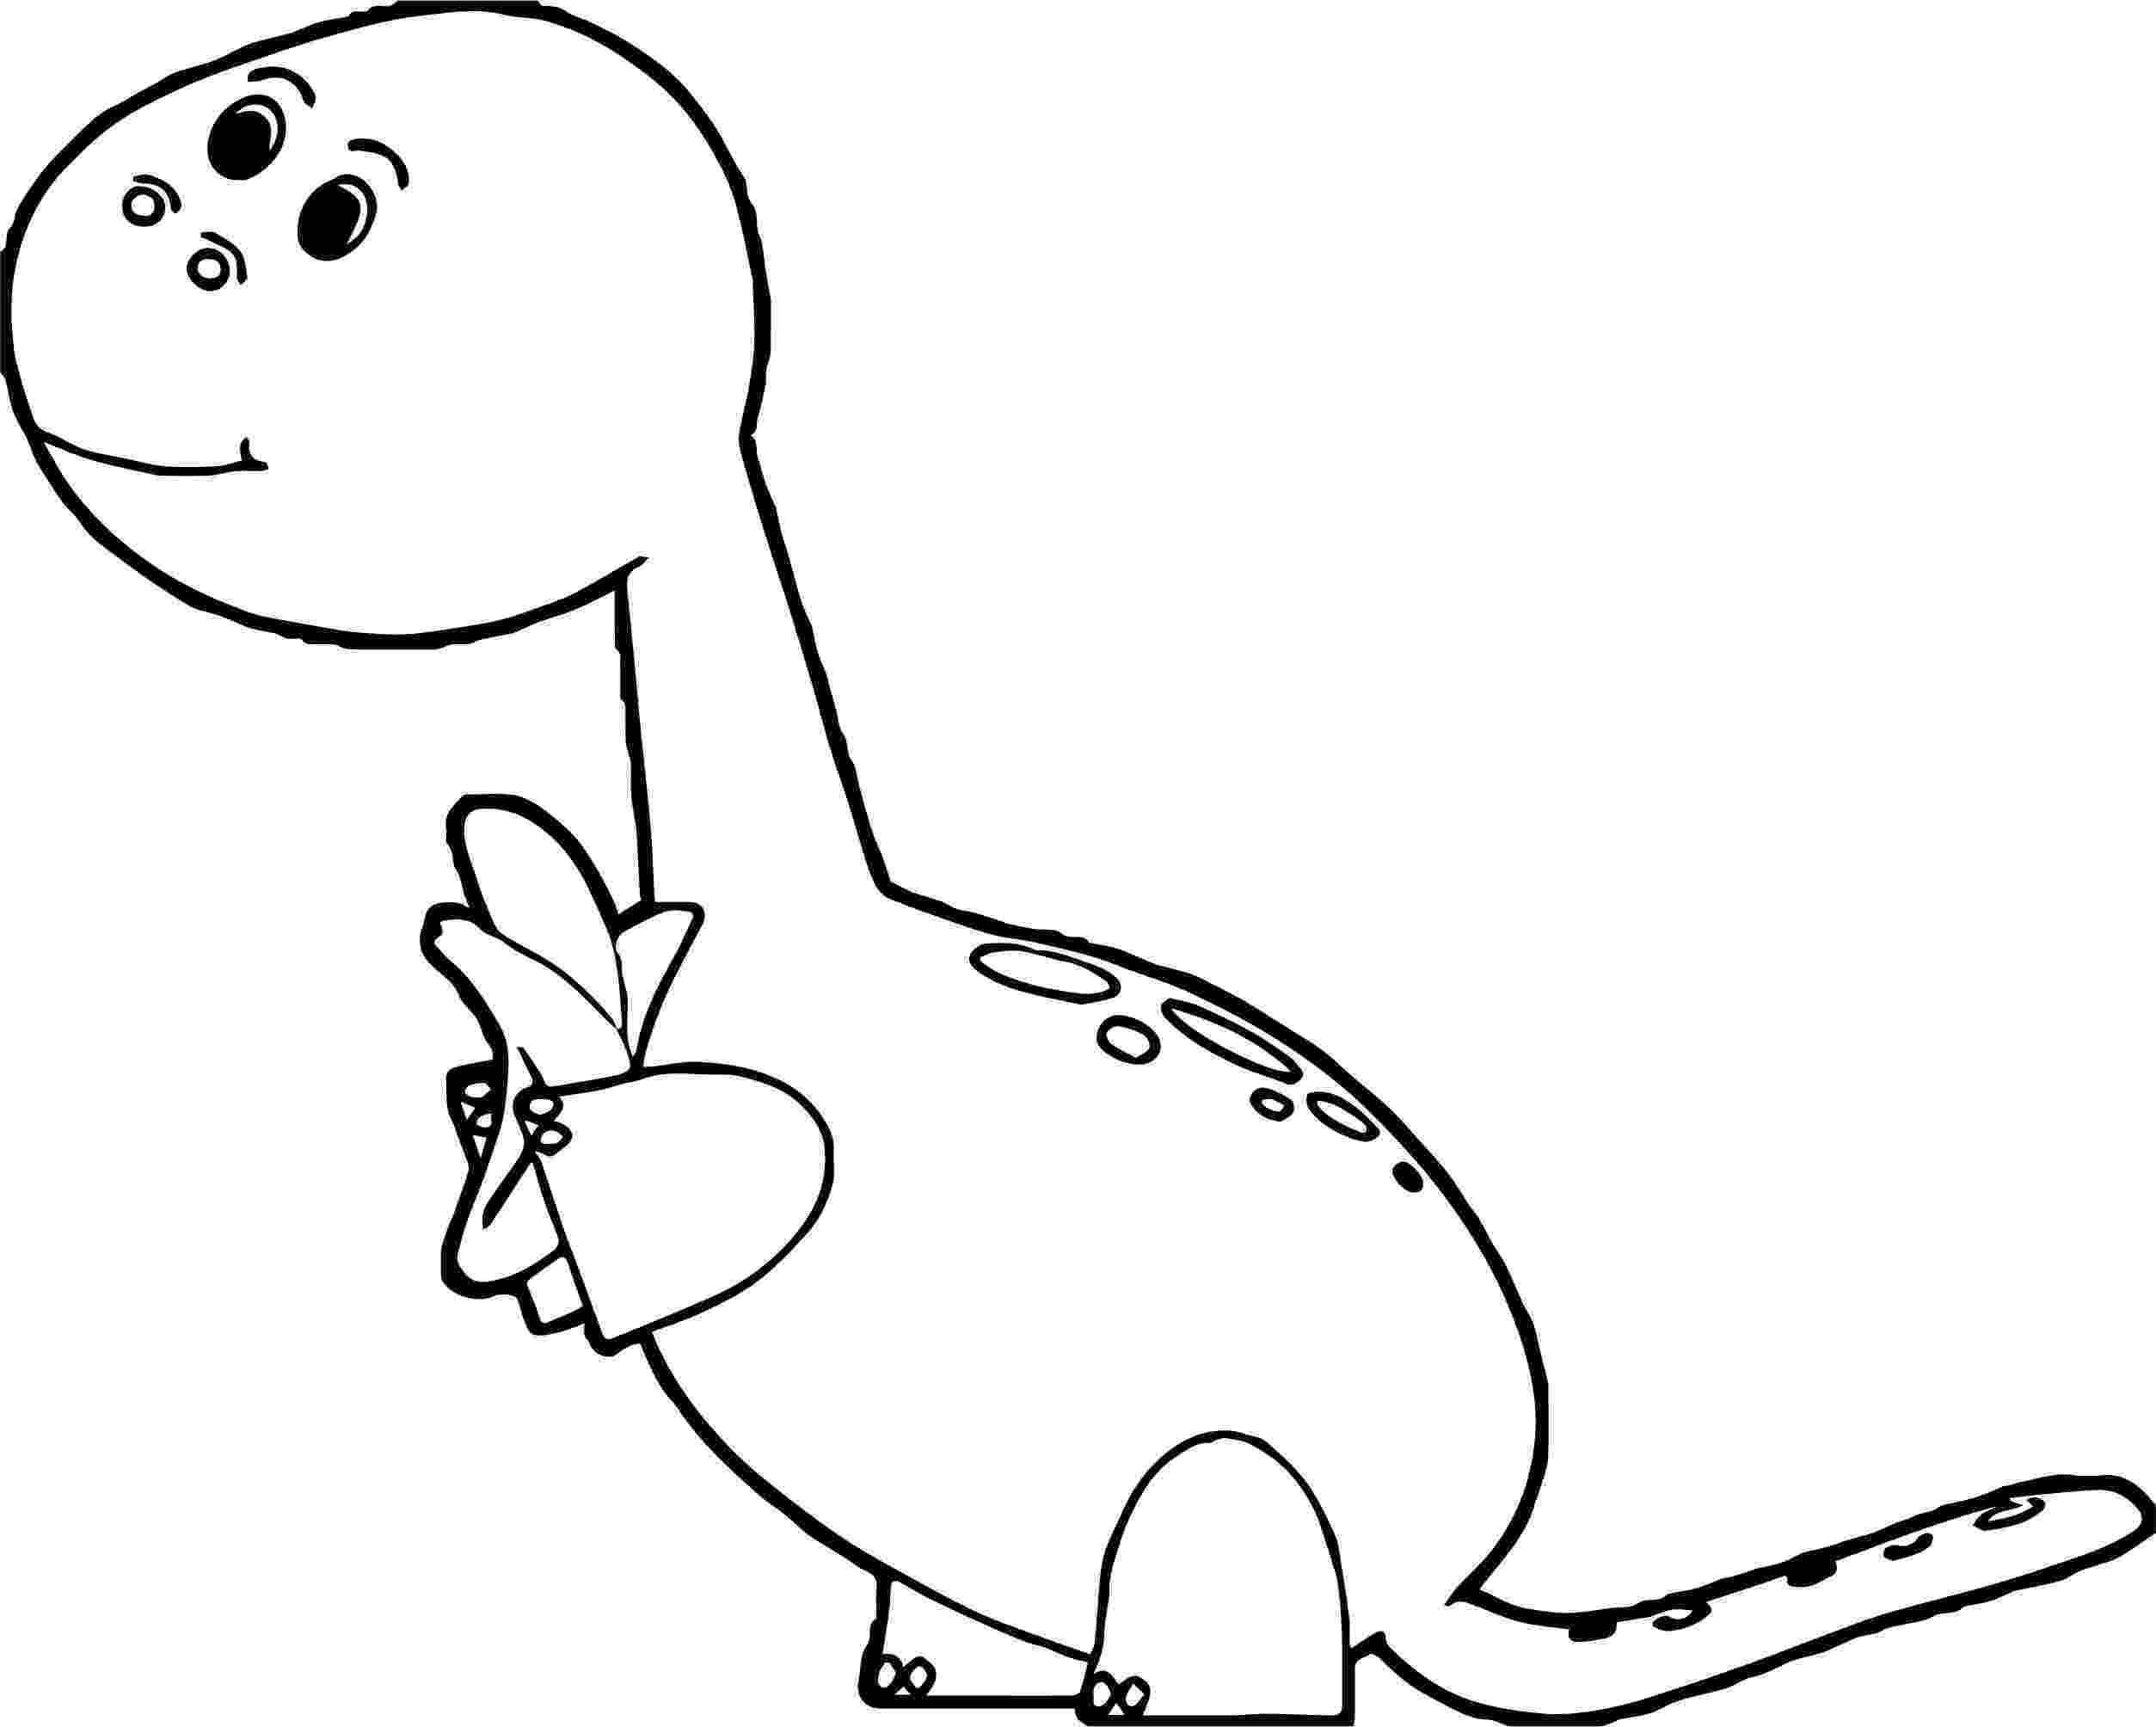 dinosaur egg coloring page dinosaur egg coloring page free download on clipartmag egg page coloring dinosaur 1 1